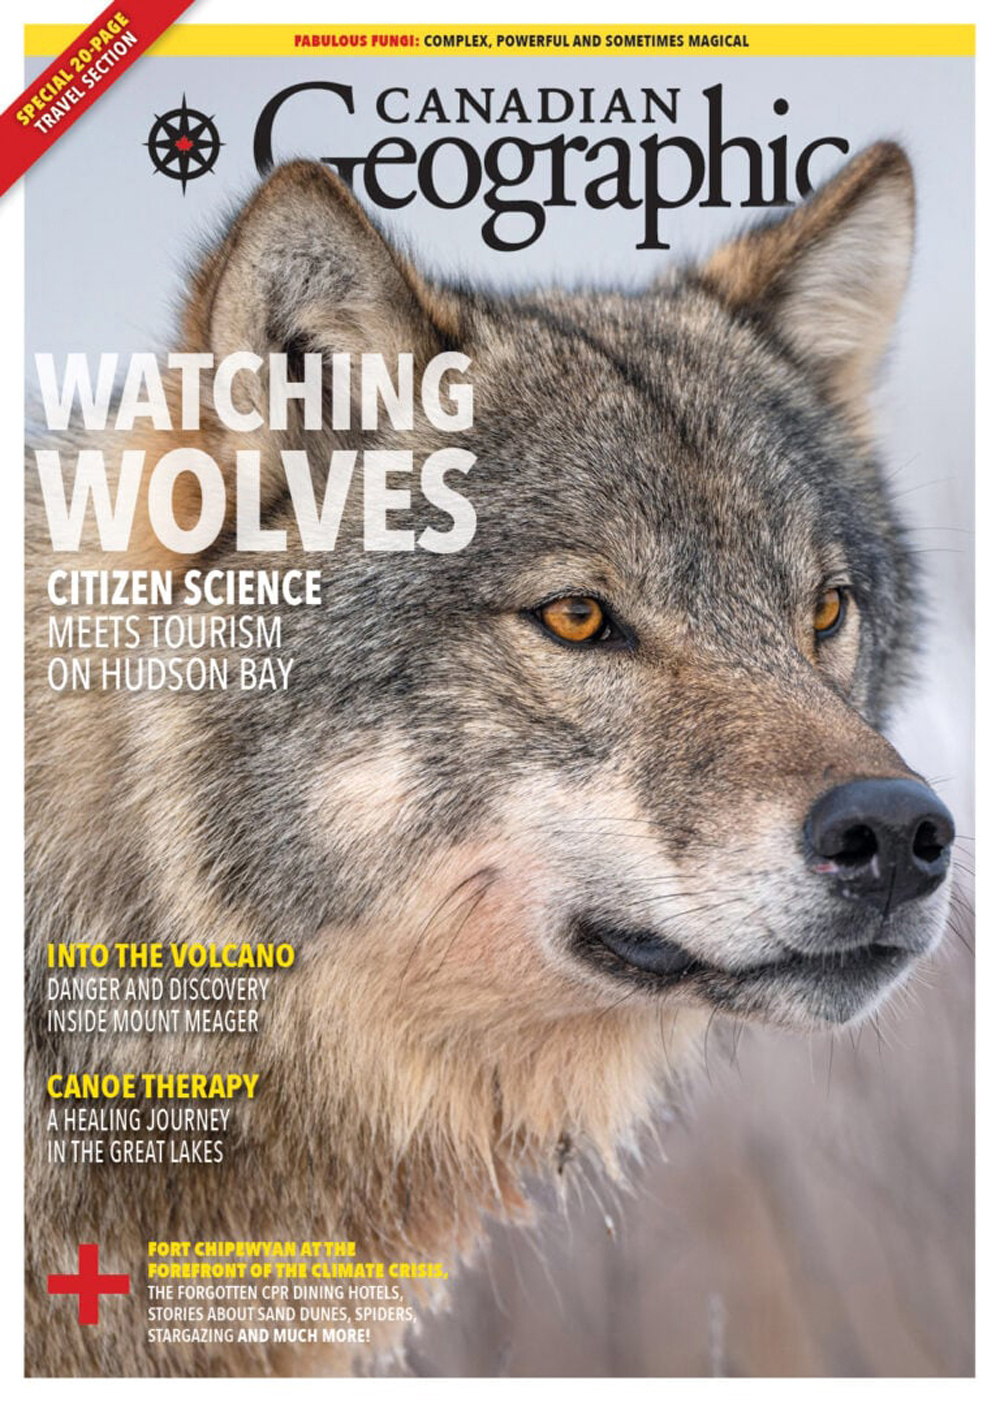 Watching Wolves - Citizen Science Meets Tourism on Hudson Bay. At Nanuk Polar Bear Lodge. Canadian Geographic. September/October Issue.